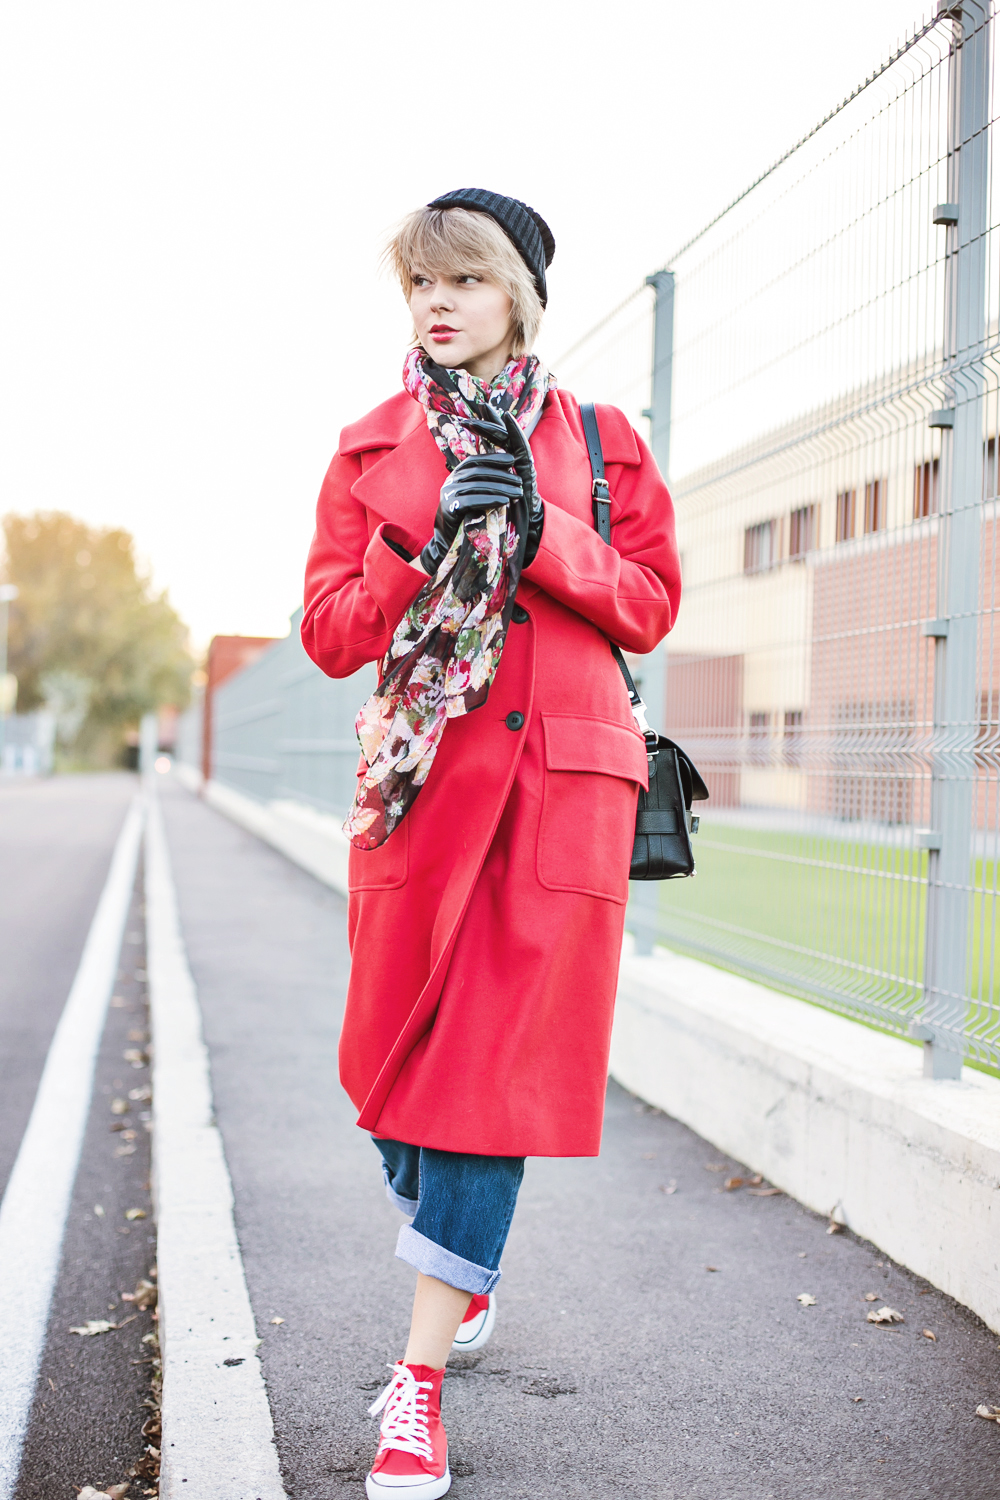 darya kamalova thecablook fashion blog russian blogger italy moda street style pixie short hair fashion blogger asos red long coat boyfriend beanie stunning gloves roses scarf jeand levis proenza schouler ps11 bag cheap monday sneakers-6 копия